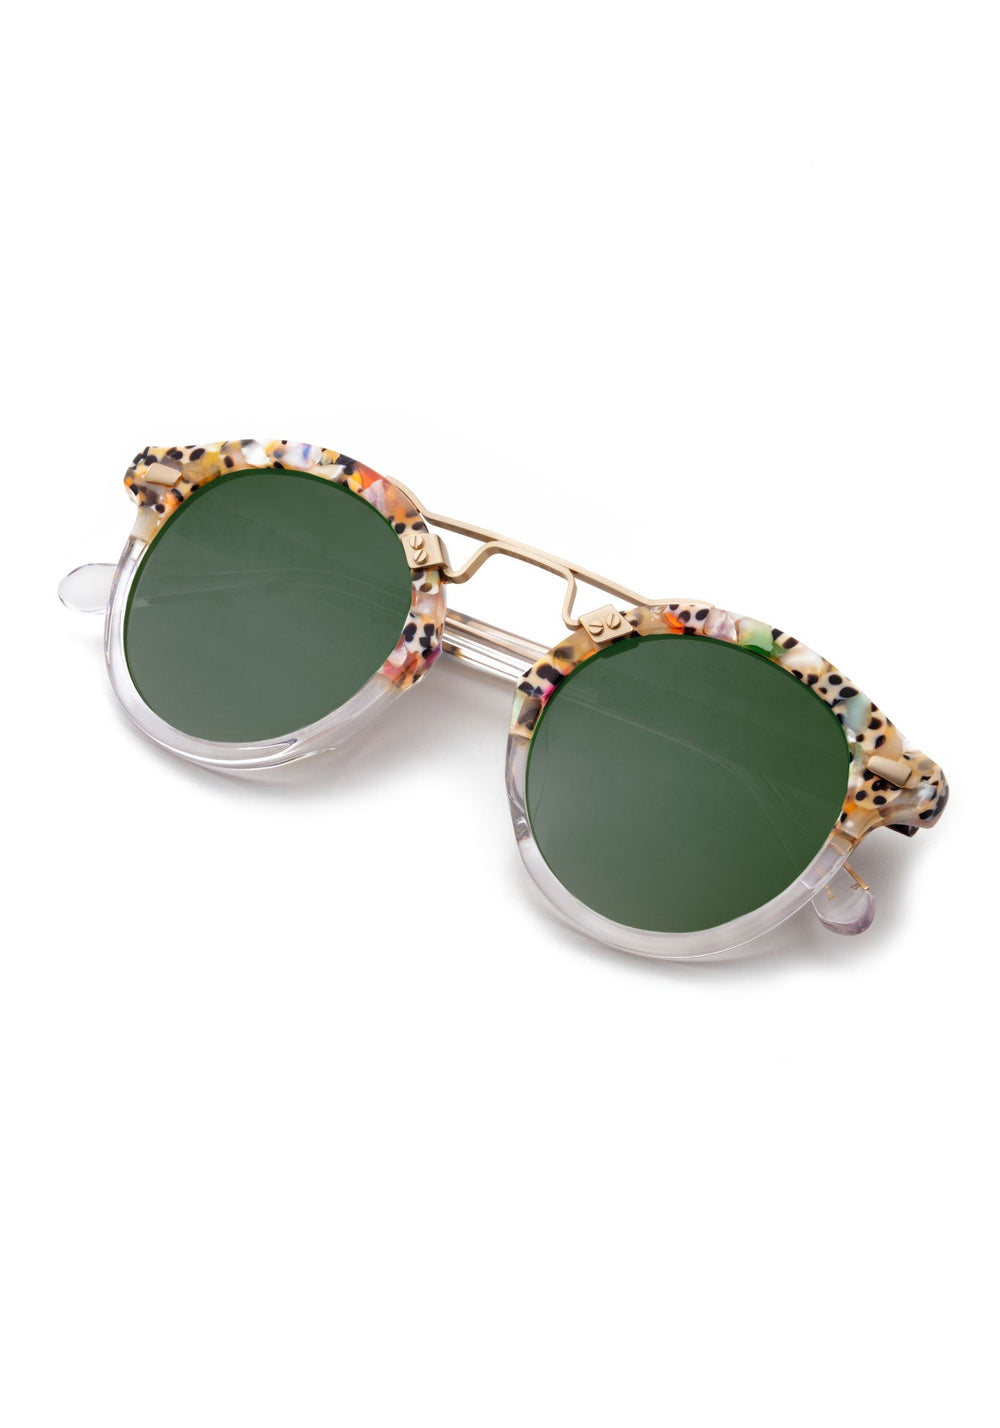 KREWE STL II | Poppy to Crystal 12K Mirrored Handcrafted, Colorful Acetate Sunglasses